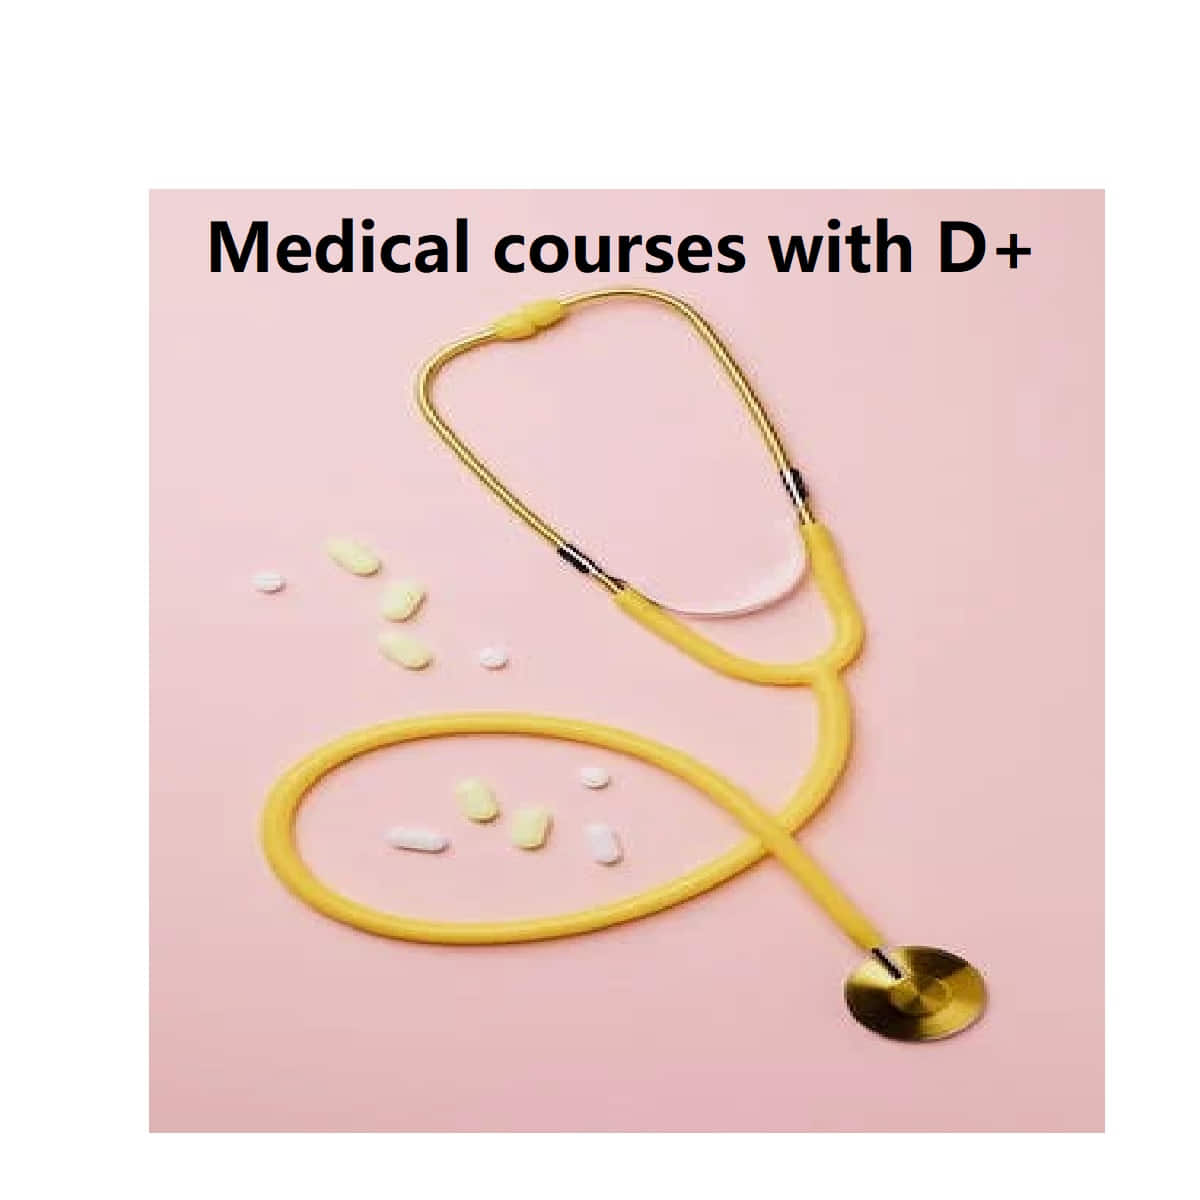 Medical courses with d+